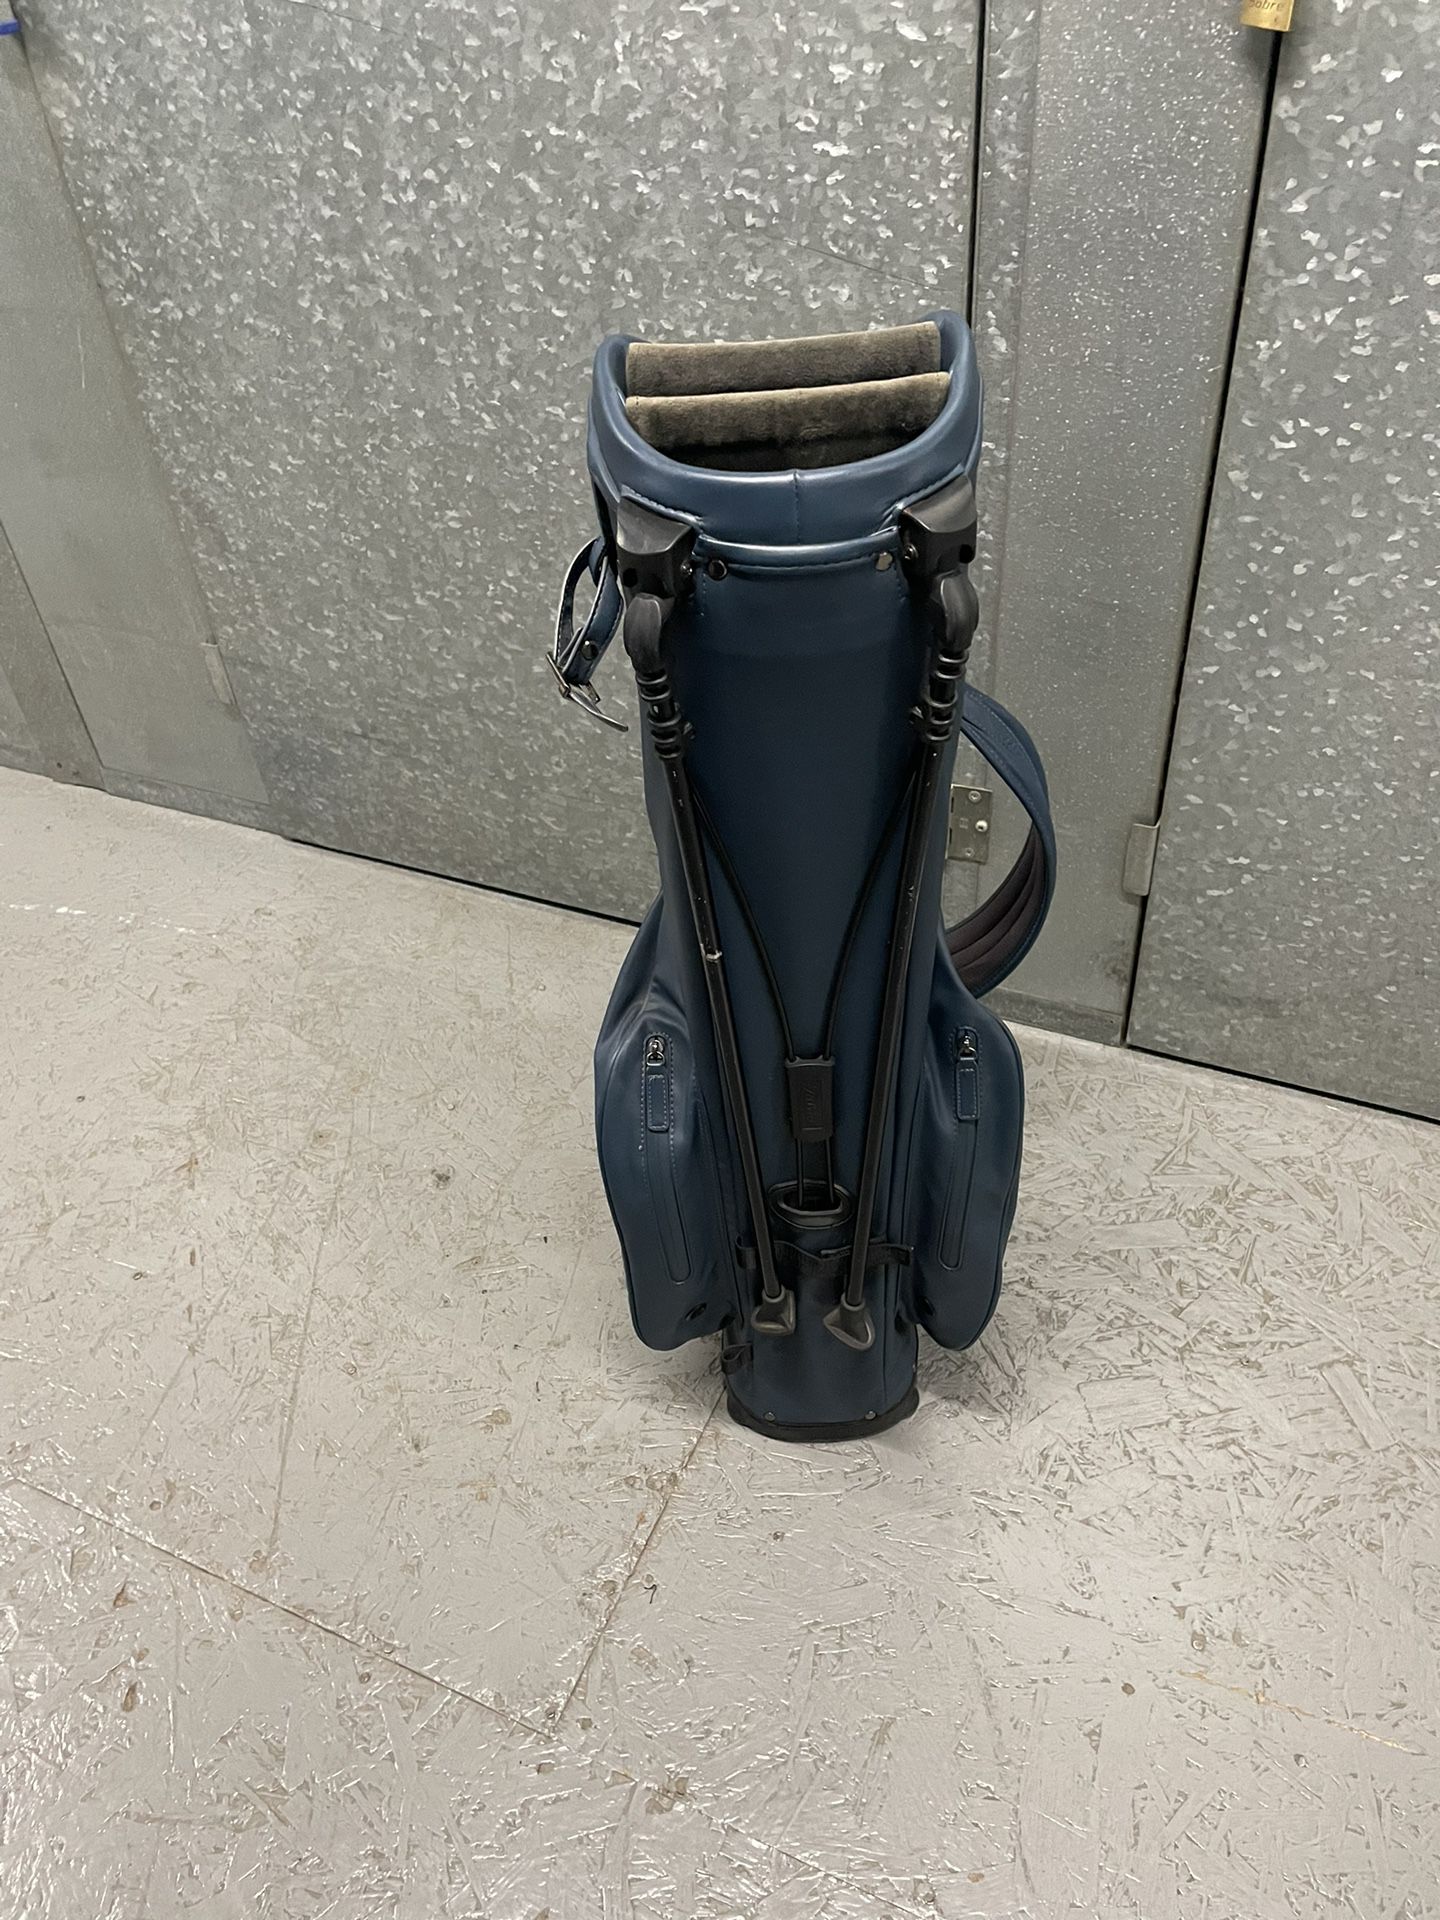 70s authentic rare Gucci golf bag for Sale in Apple Valley, CA - OfferUp